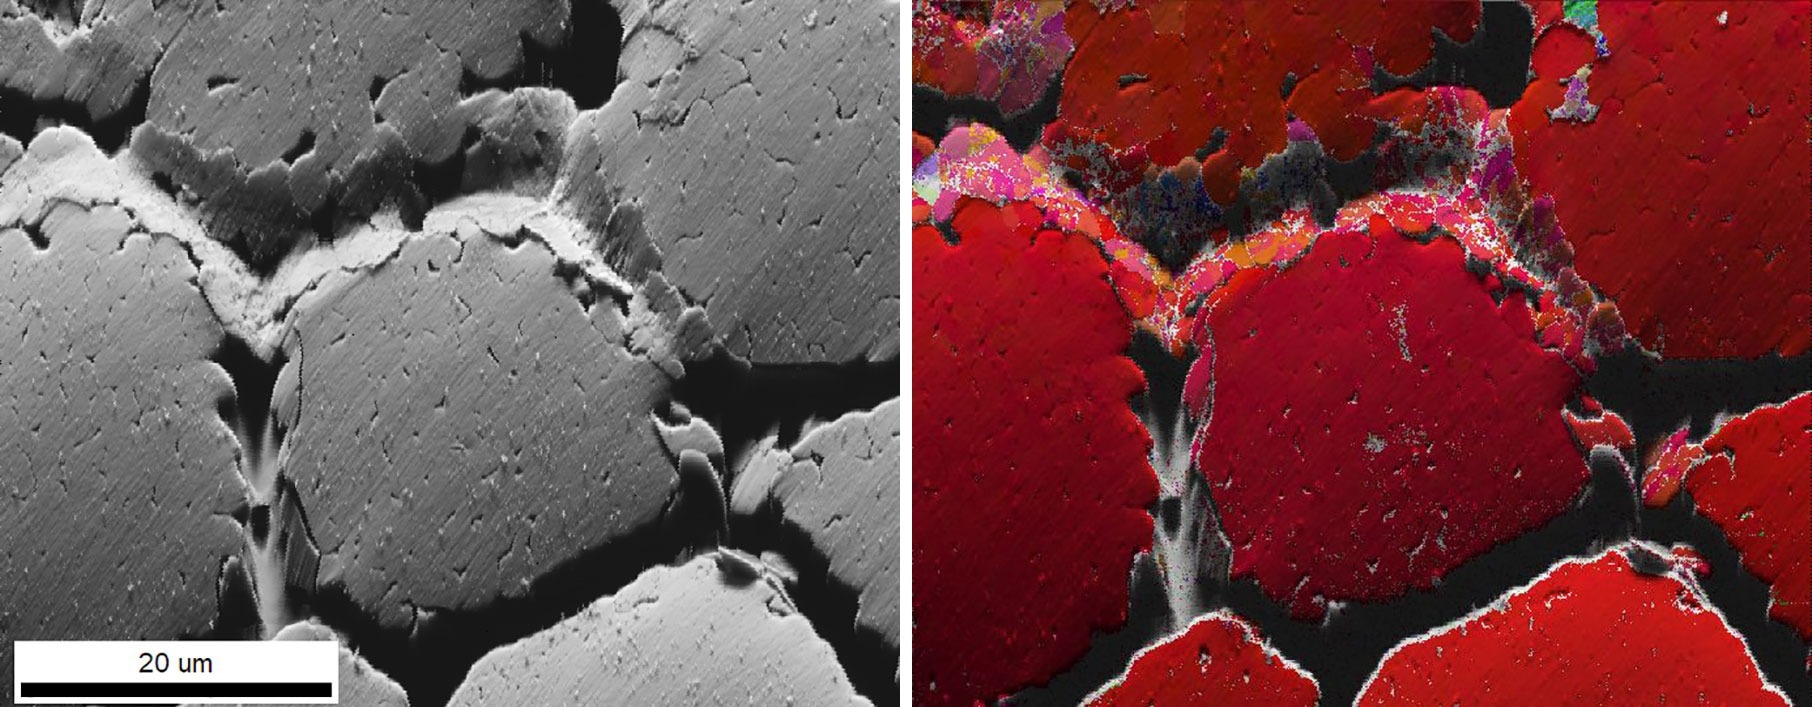 (left) Image Quality (IQ) map with (right) superimposed IPF map of aragonite platelets in between calcite pillars.